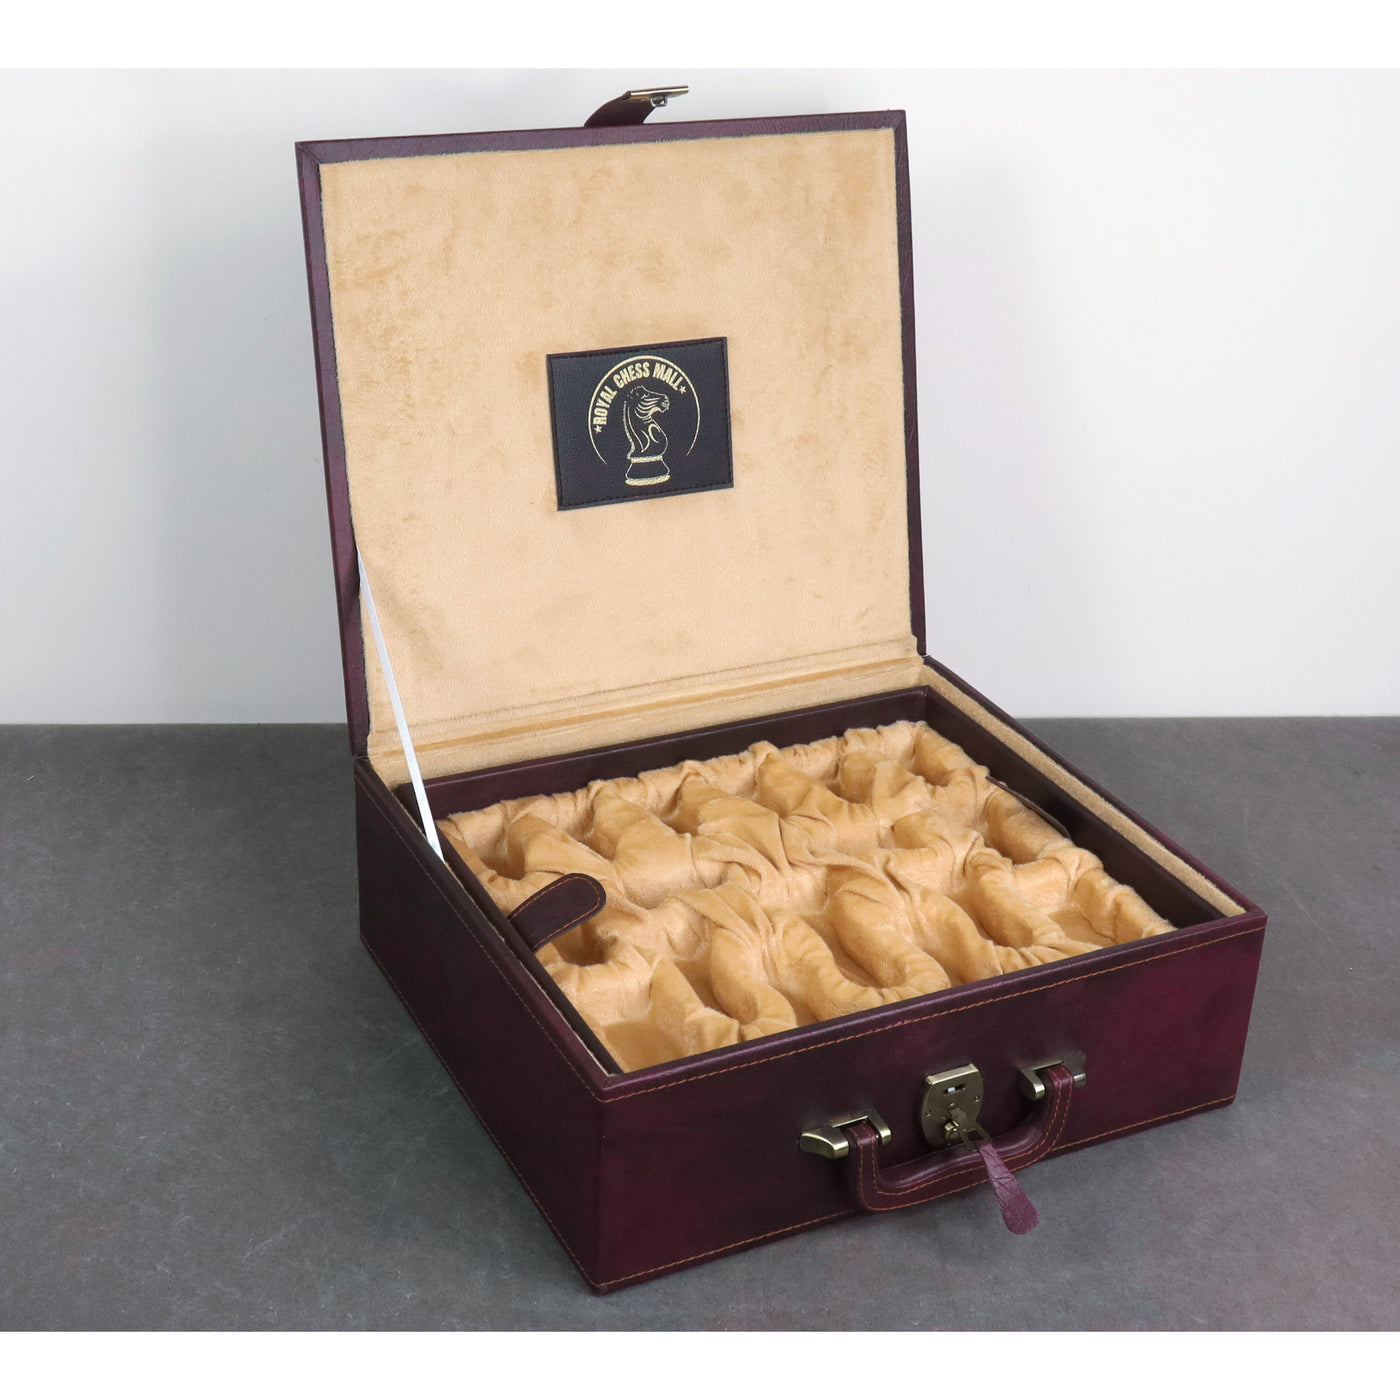 Deluxe Burgundy Leatherette Coffer Storage Box for Chess Pieces 